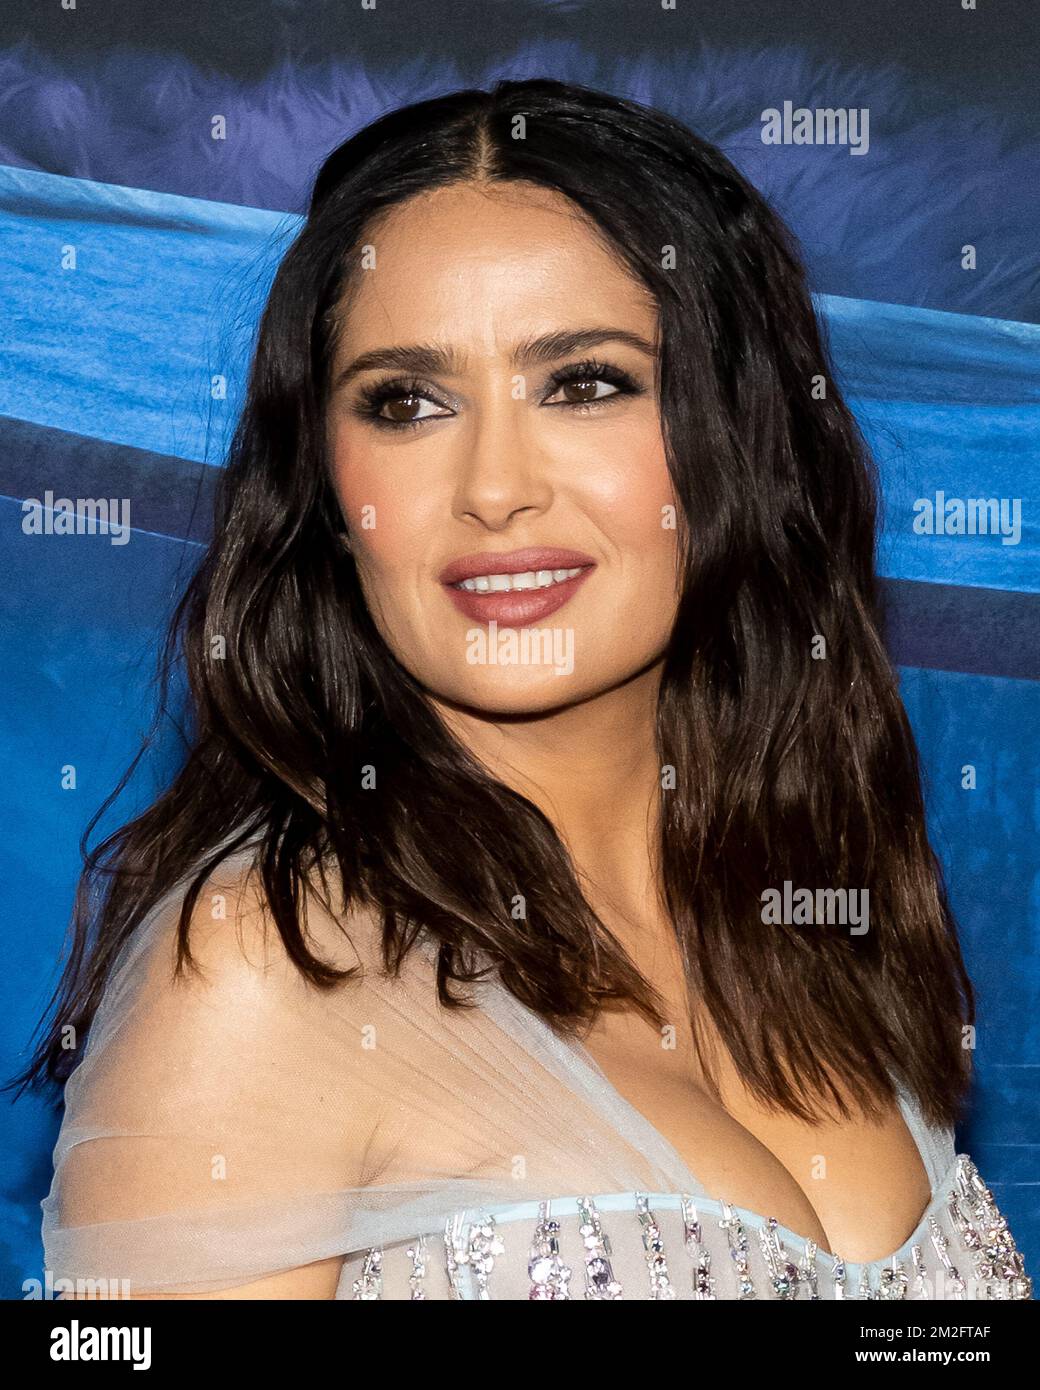 New York, USA. 13th Dec, 2022. Salma Hayek arrives on the red carpet for the premiere of “Puss in Boots: The Last Wish“ at Jazz at Lincoln Center's Frederick P. Rose Hall in New York, New York, on Dec. 13, 2022. (Photo by Gabriele Holtermann/Sipa USA) Credit: Sipa USA/Alamy Live News Stock Photo